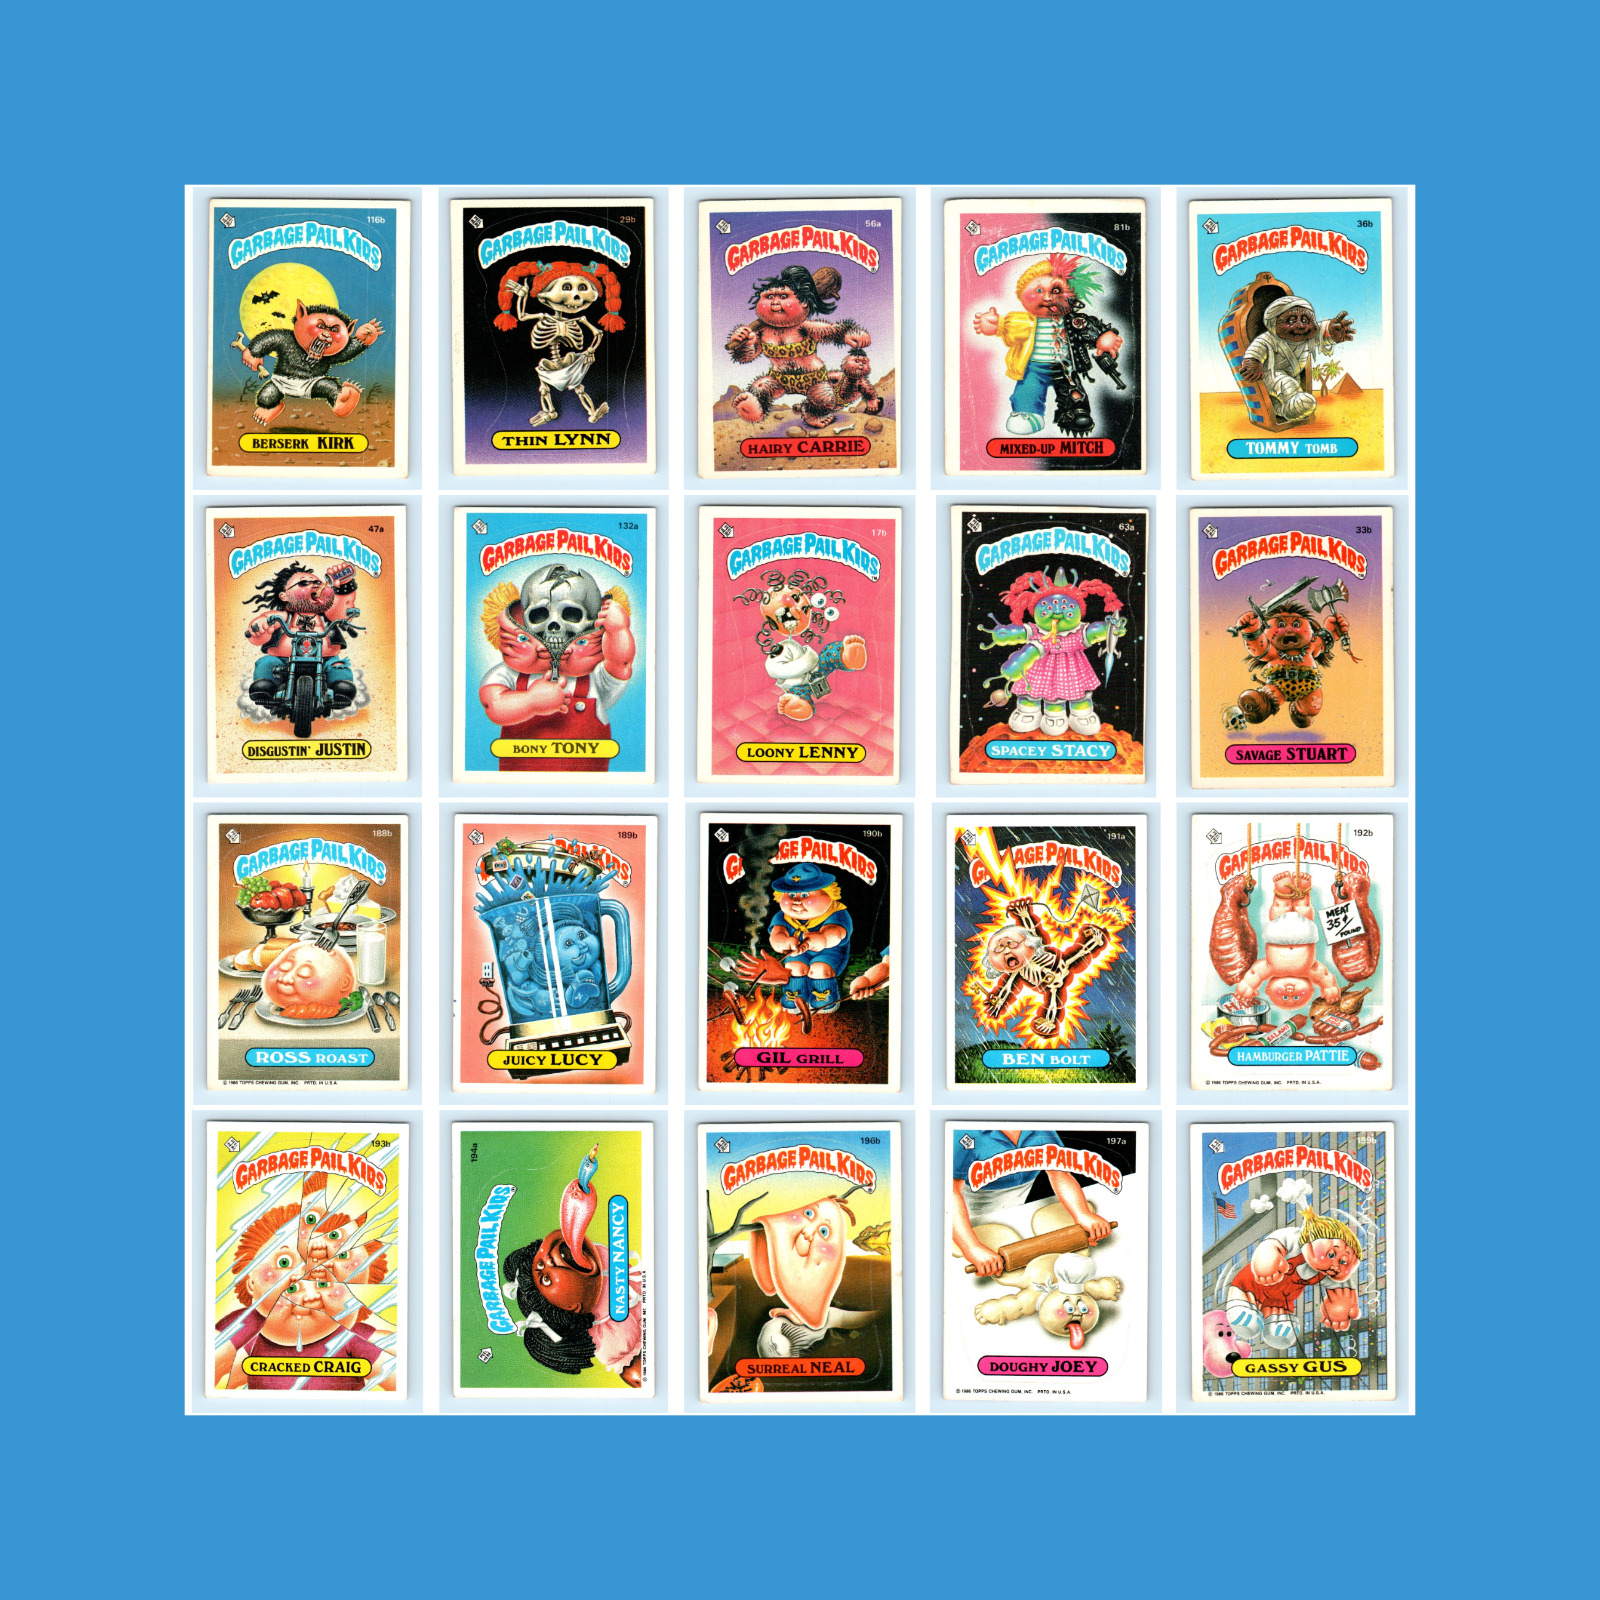 Vintage Garbage Pail Kids Lot 20 Cards Low-Mid Grade 1980s Topps GPK Cards